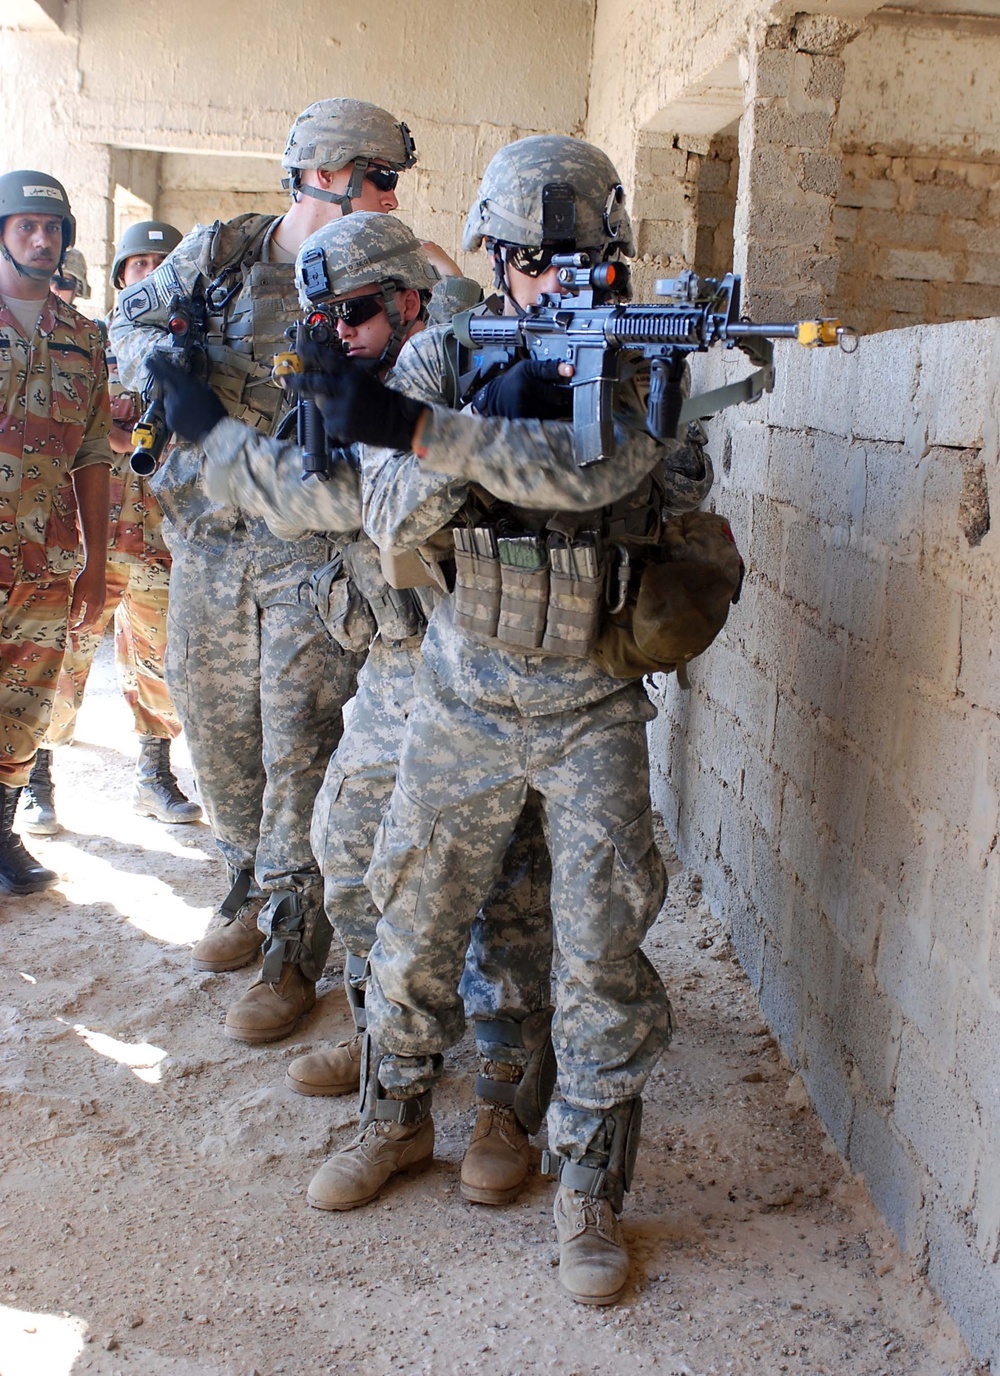 82nd Airborne Division helps train troops coalition forces in Egypt